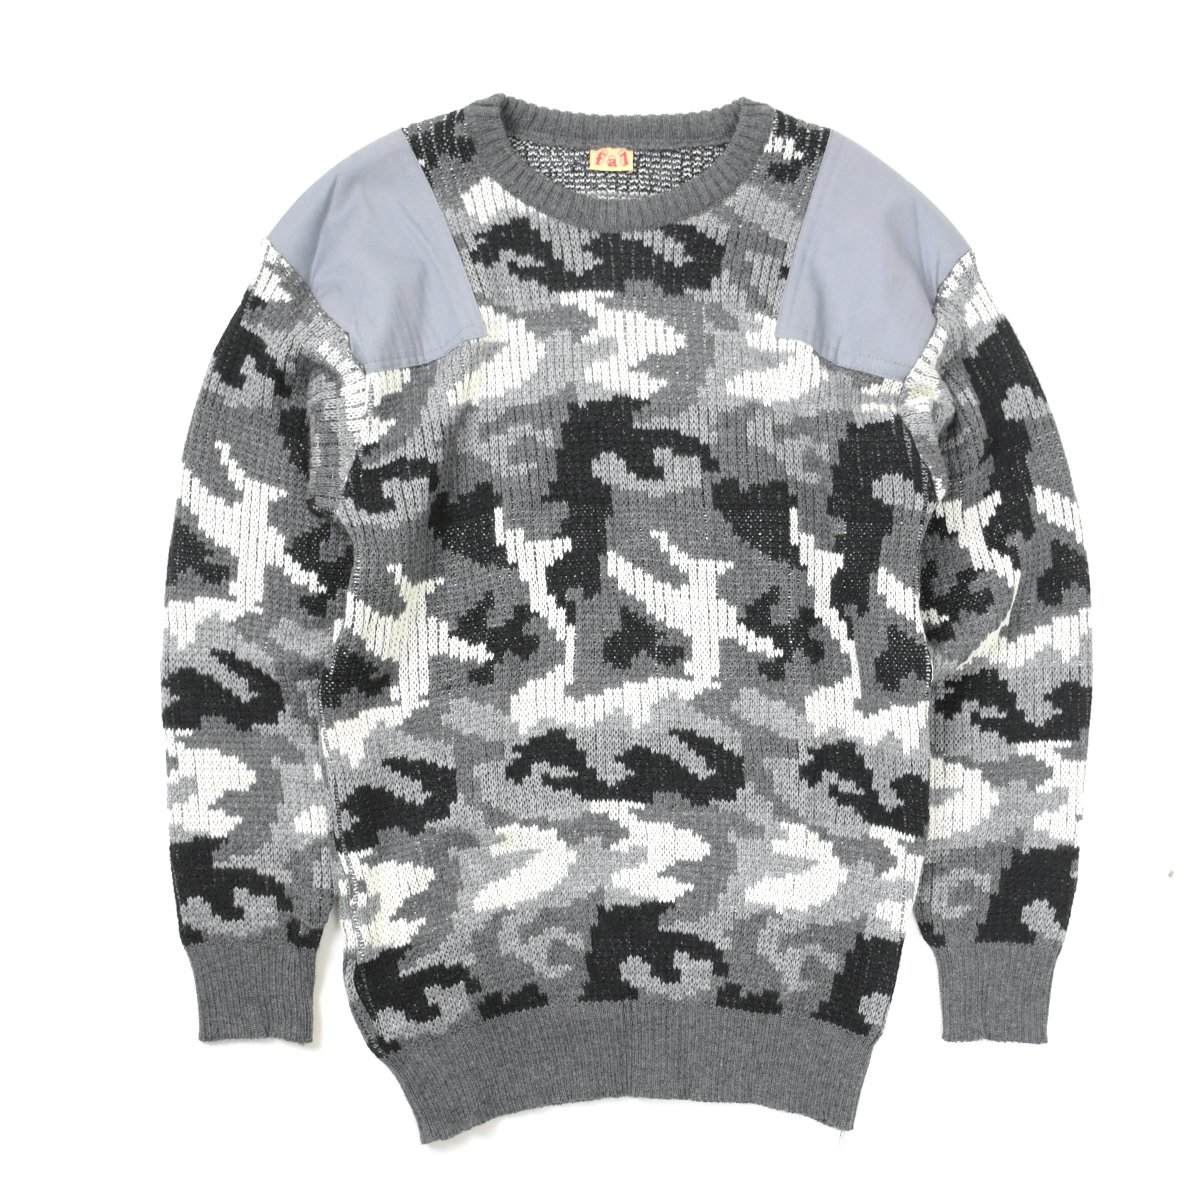 <img class='new_mark_img1' src='https://img.shop-pro.jp/img/new/icons8.gif' style='border:none;display:inline;margin:0px;padding:0px;width:auto;' />【DEAD STOCK】Itlian Army Metropolitan Sweater (Urban Camo)
                          </a>
            <span class=